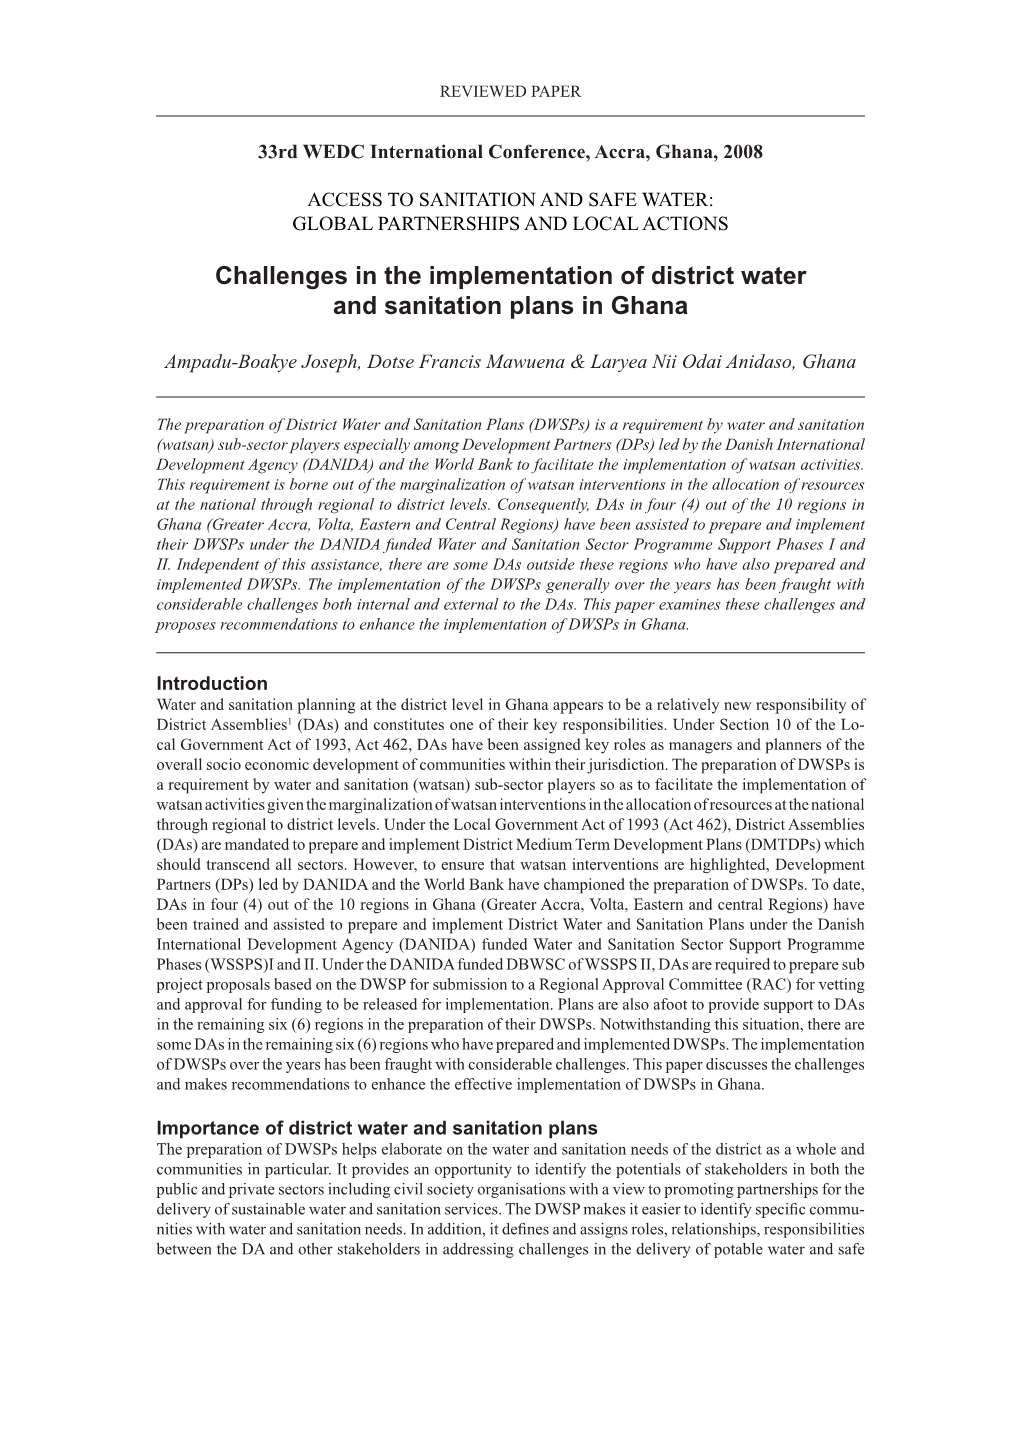 Challenges in the Implementation of District Water and Sanitation Plans in Ghana